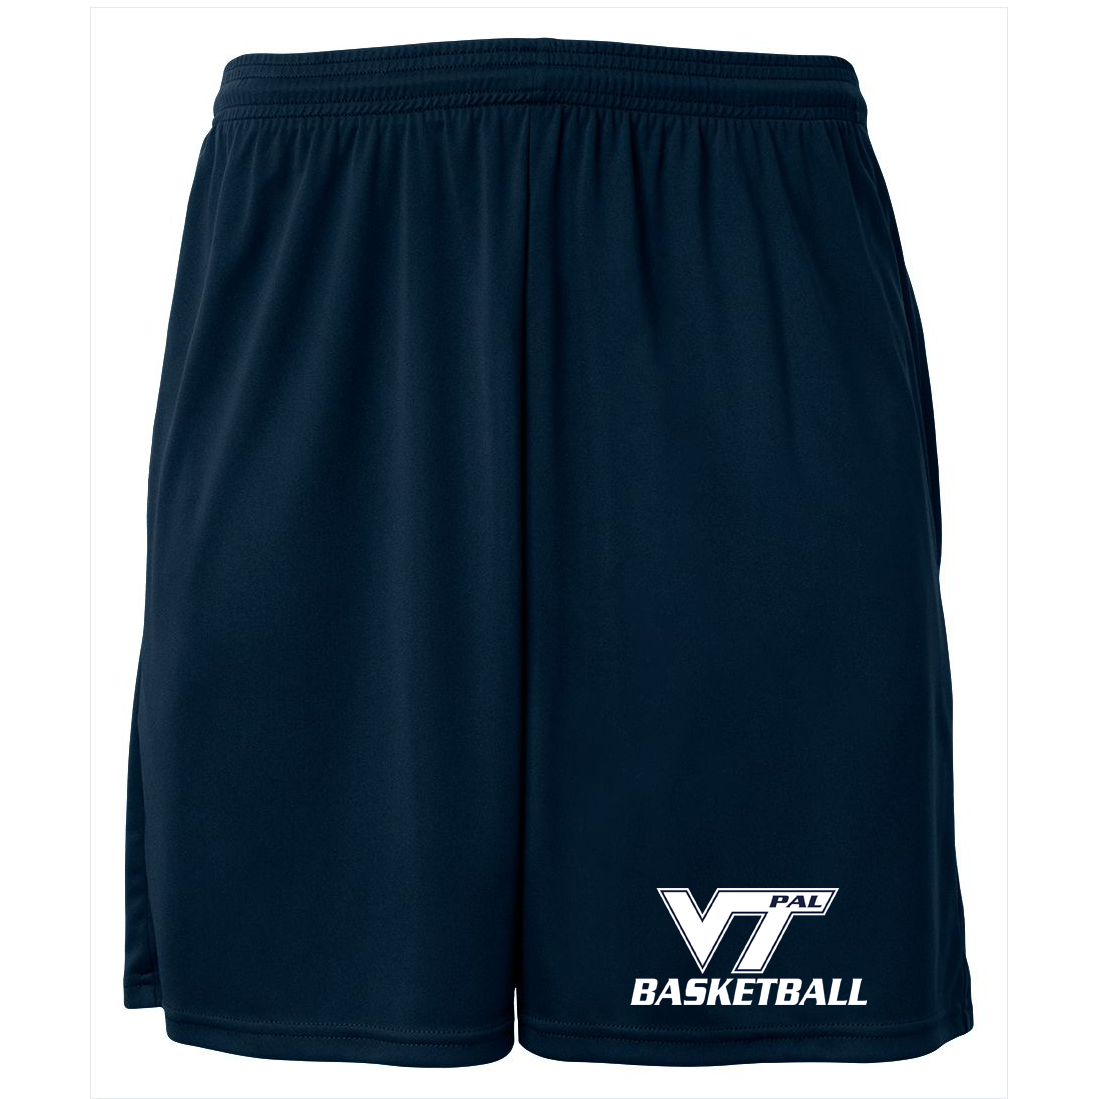 Vernon PAL Basketball Cooling Short with Pockets